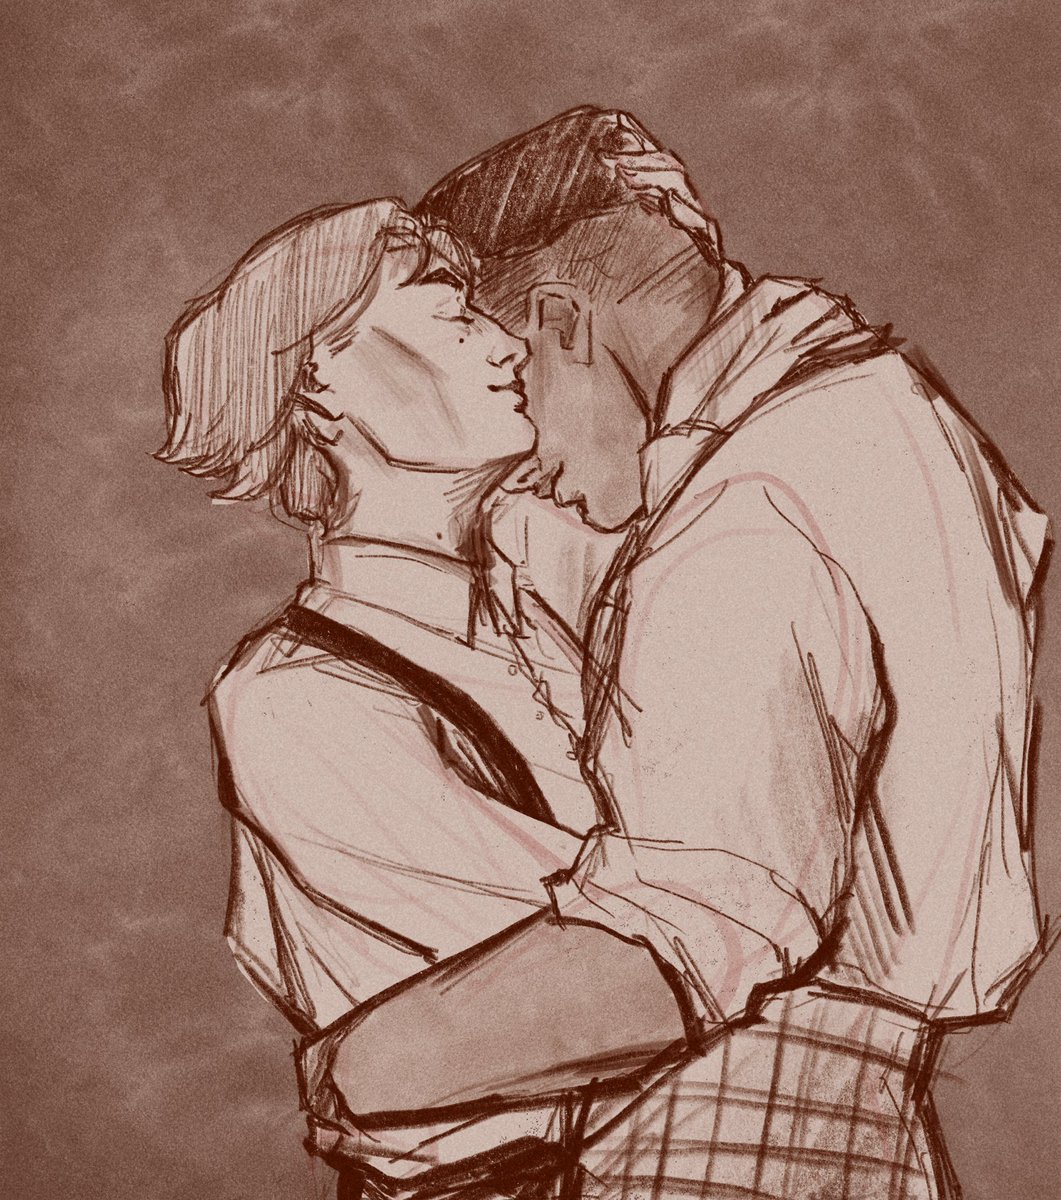 From a tumblr ask I got! 💛💛 coincidentally Let's do it, let's fall in love plays in the background 

A goal of mine is to work more on the 1920s au 👌

#jayvik 